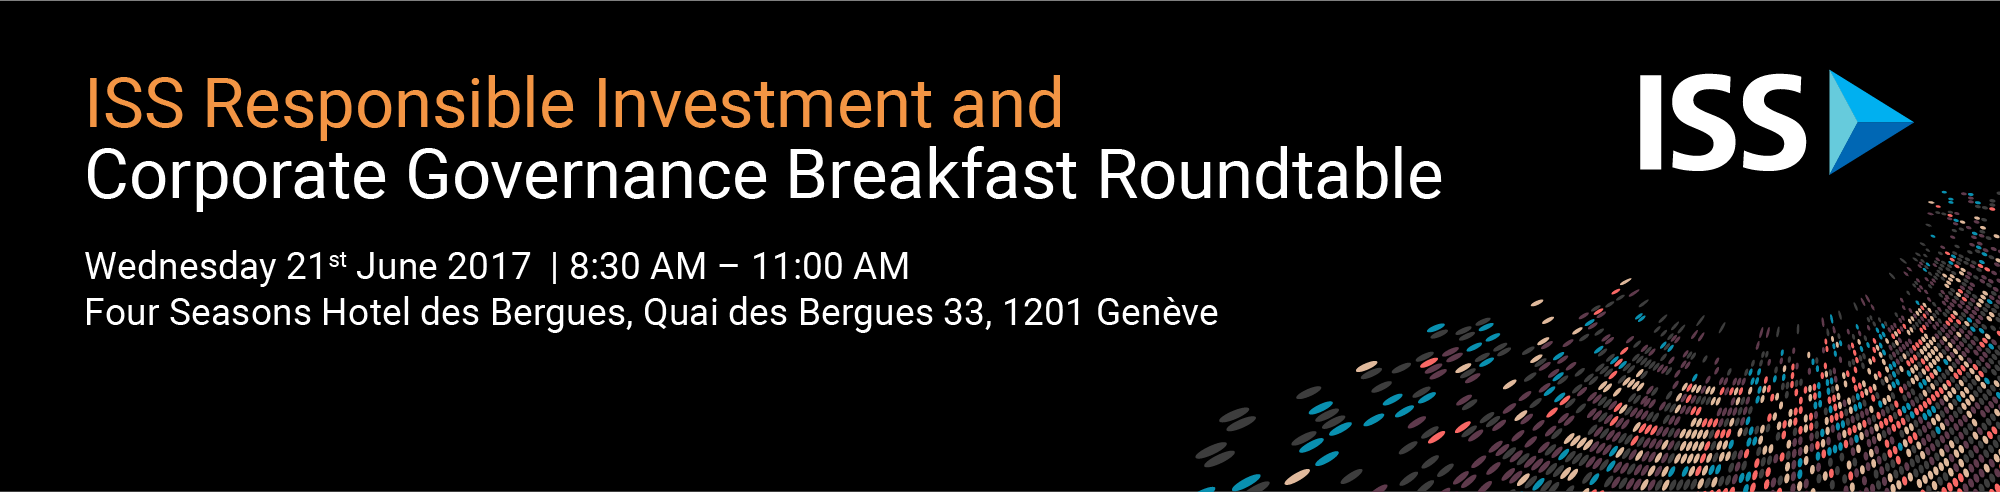 ISS Responsible Investment and Corporate Governance Breakfast Roundtable